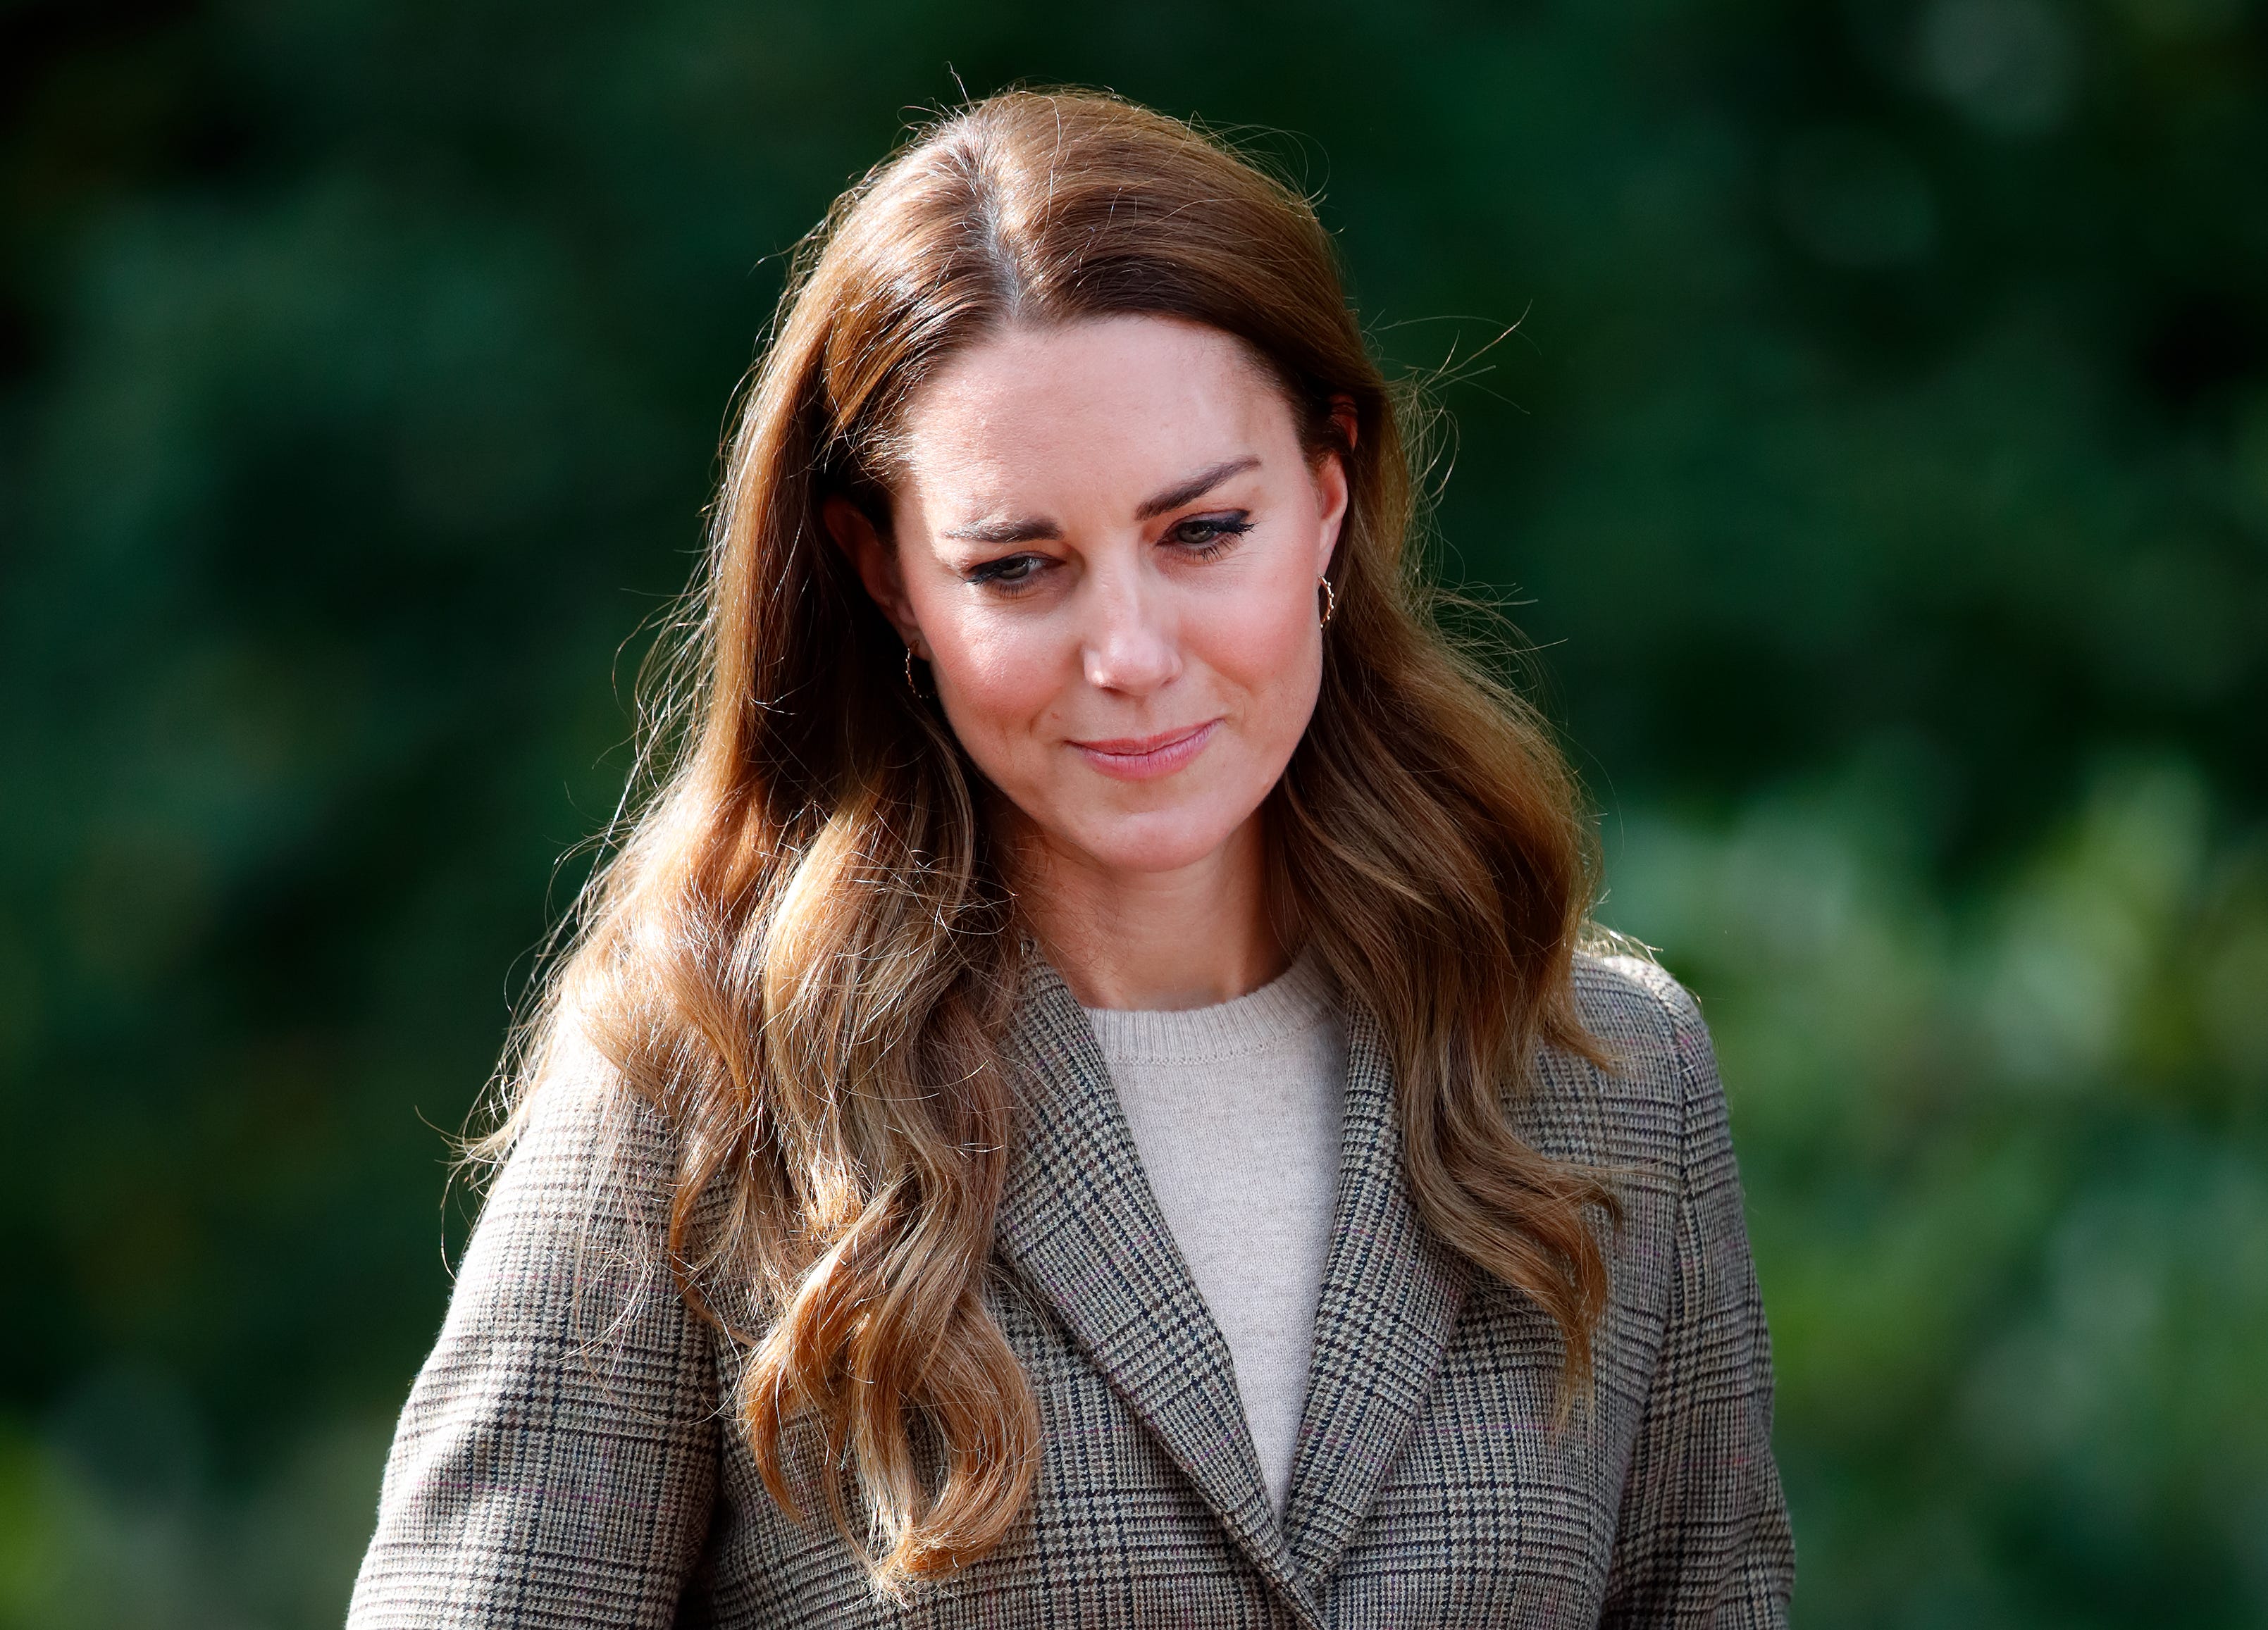 Kate Middleton Made Her Cancer Announcement on Her Own Terms